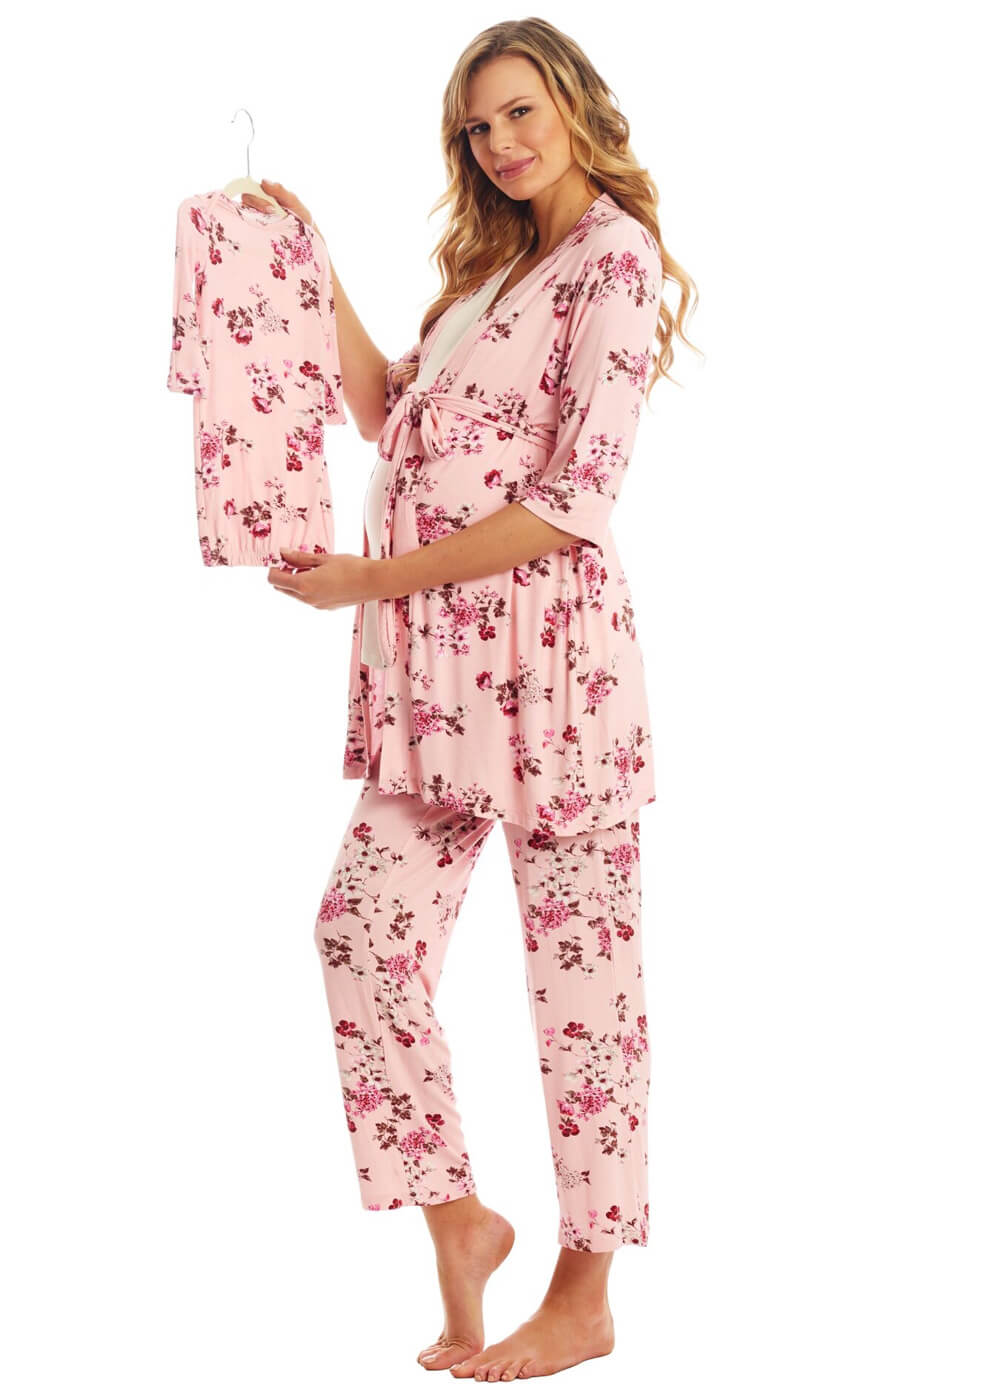 Everly Grey - Analise Mommy & Me PJ Gift Set in Pink Blossom